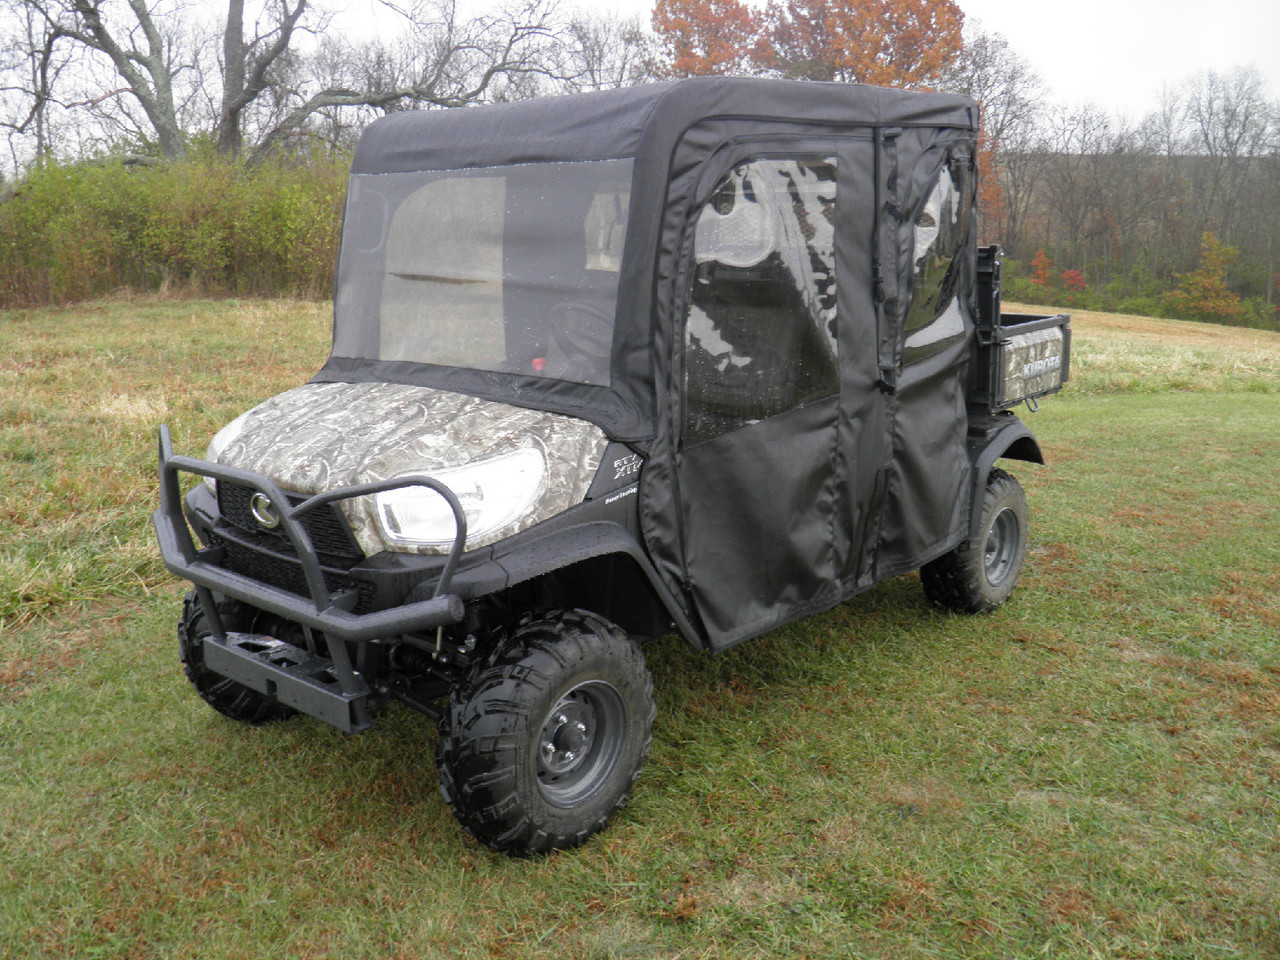 3 Star side x side Kubota RTV X1140 full cab enclosure with vinyl windshield front and side angle view